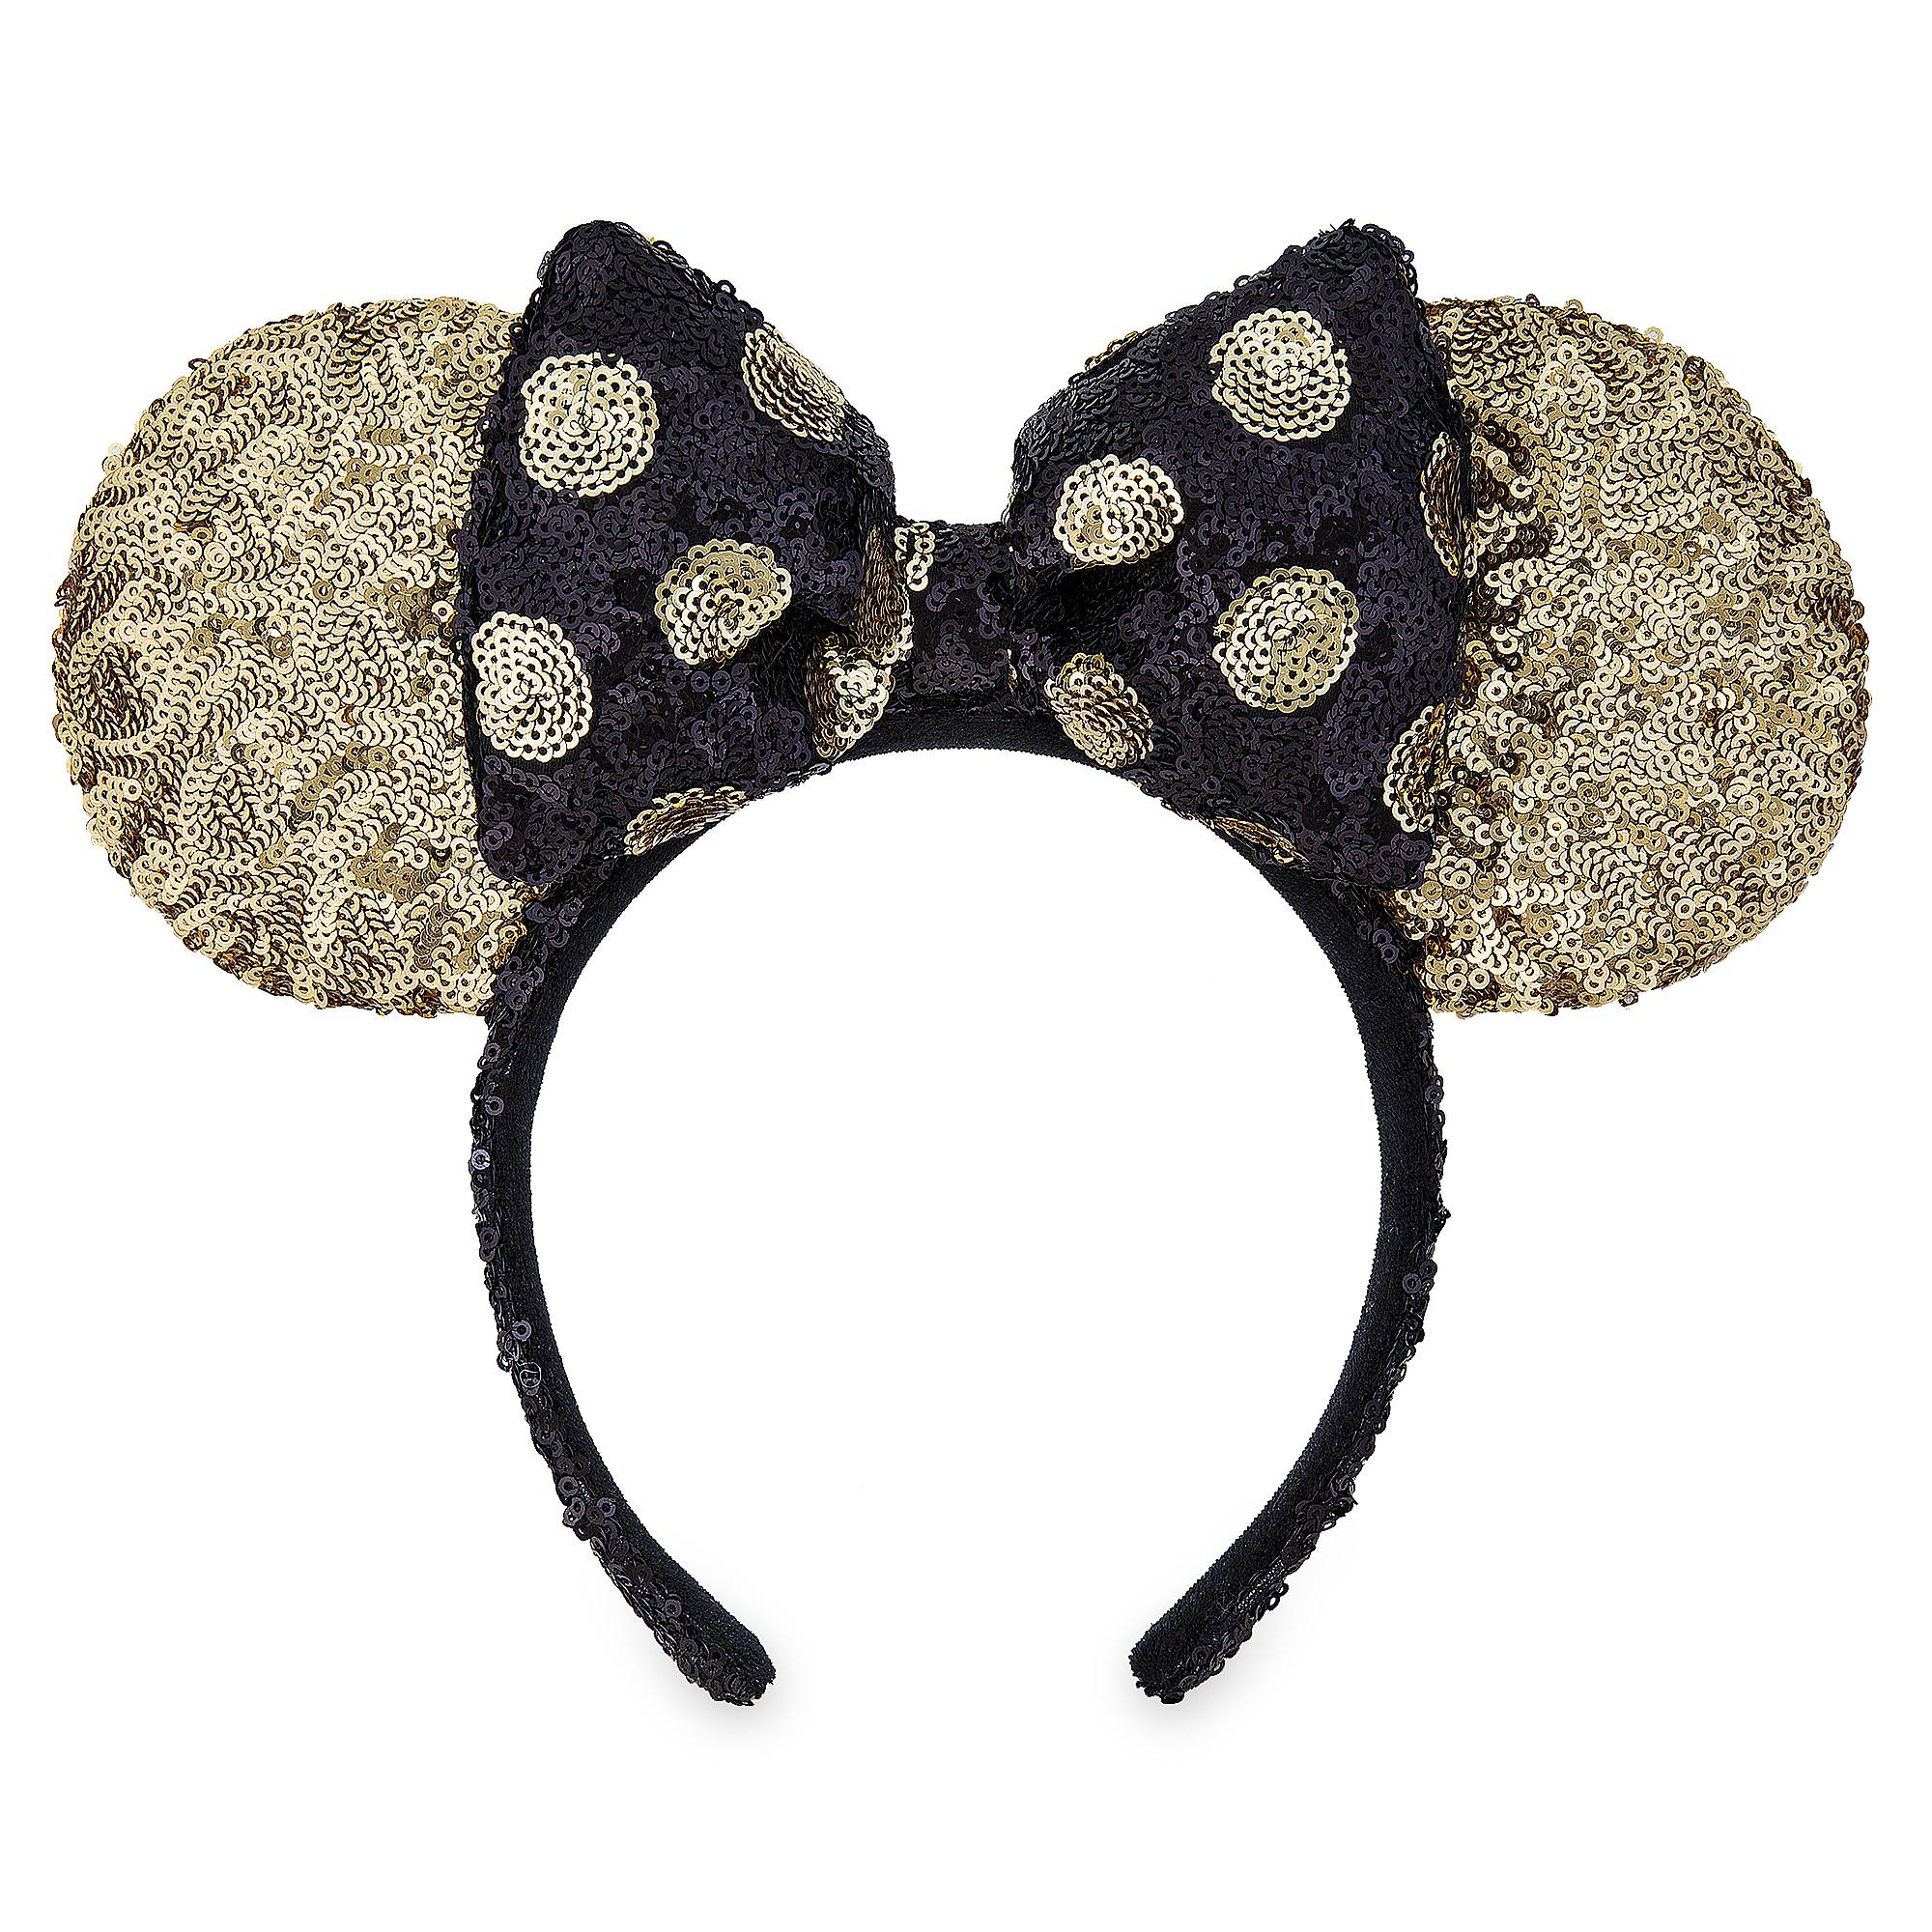 Minnie Mouse Sequined Ear Headband with Bow – Black and Gold image